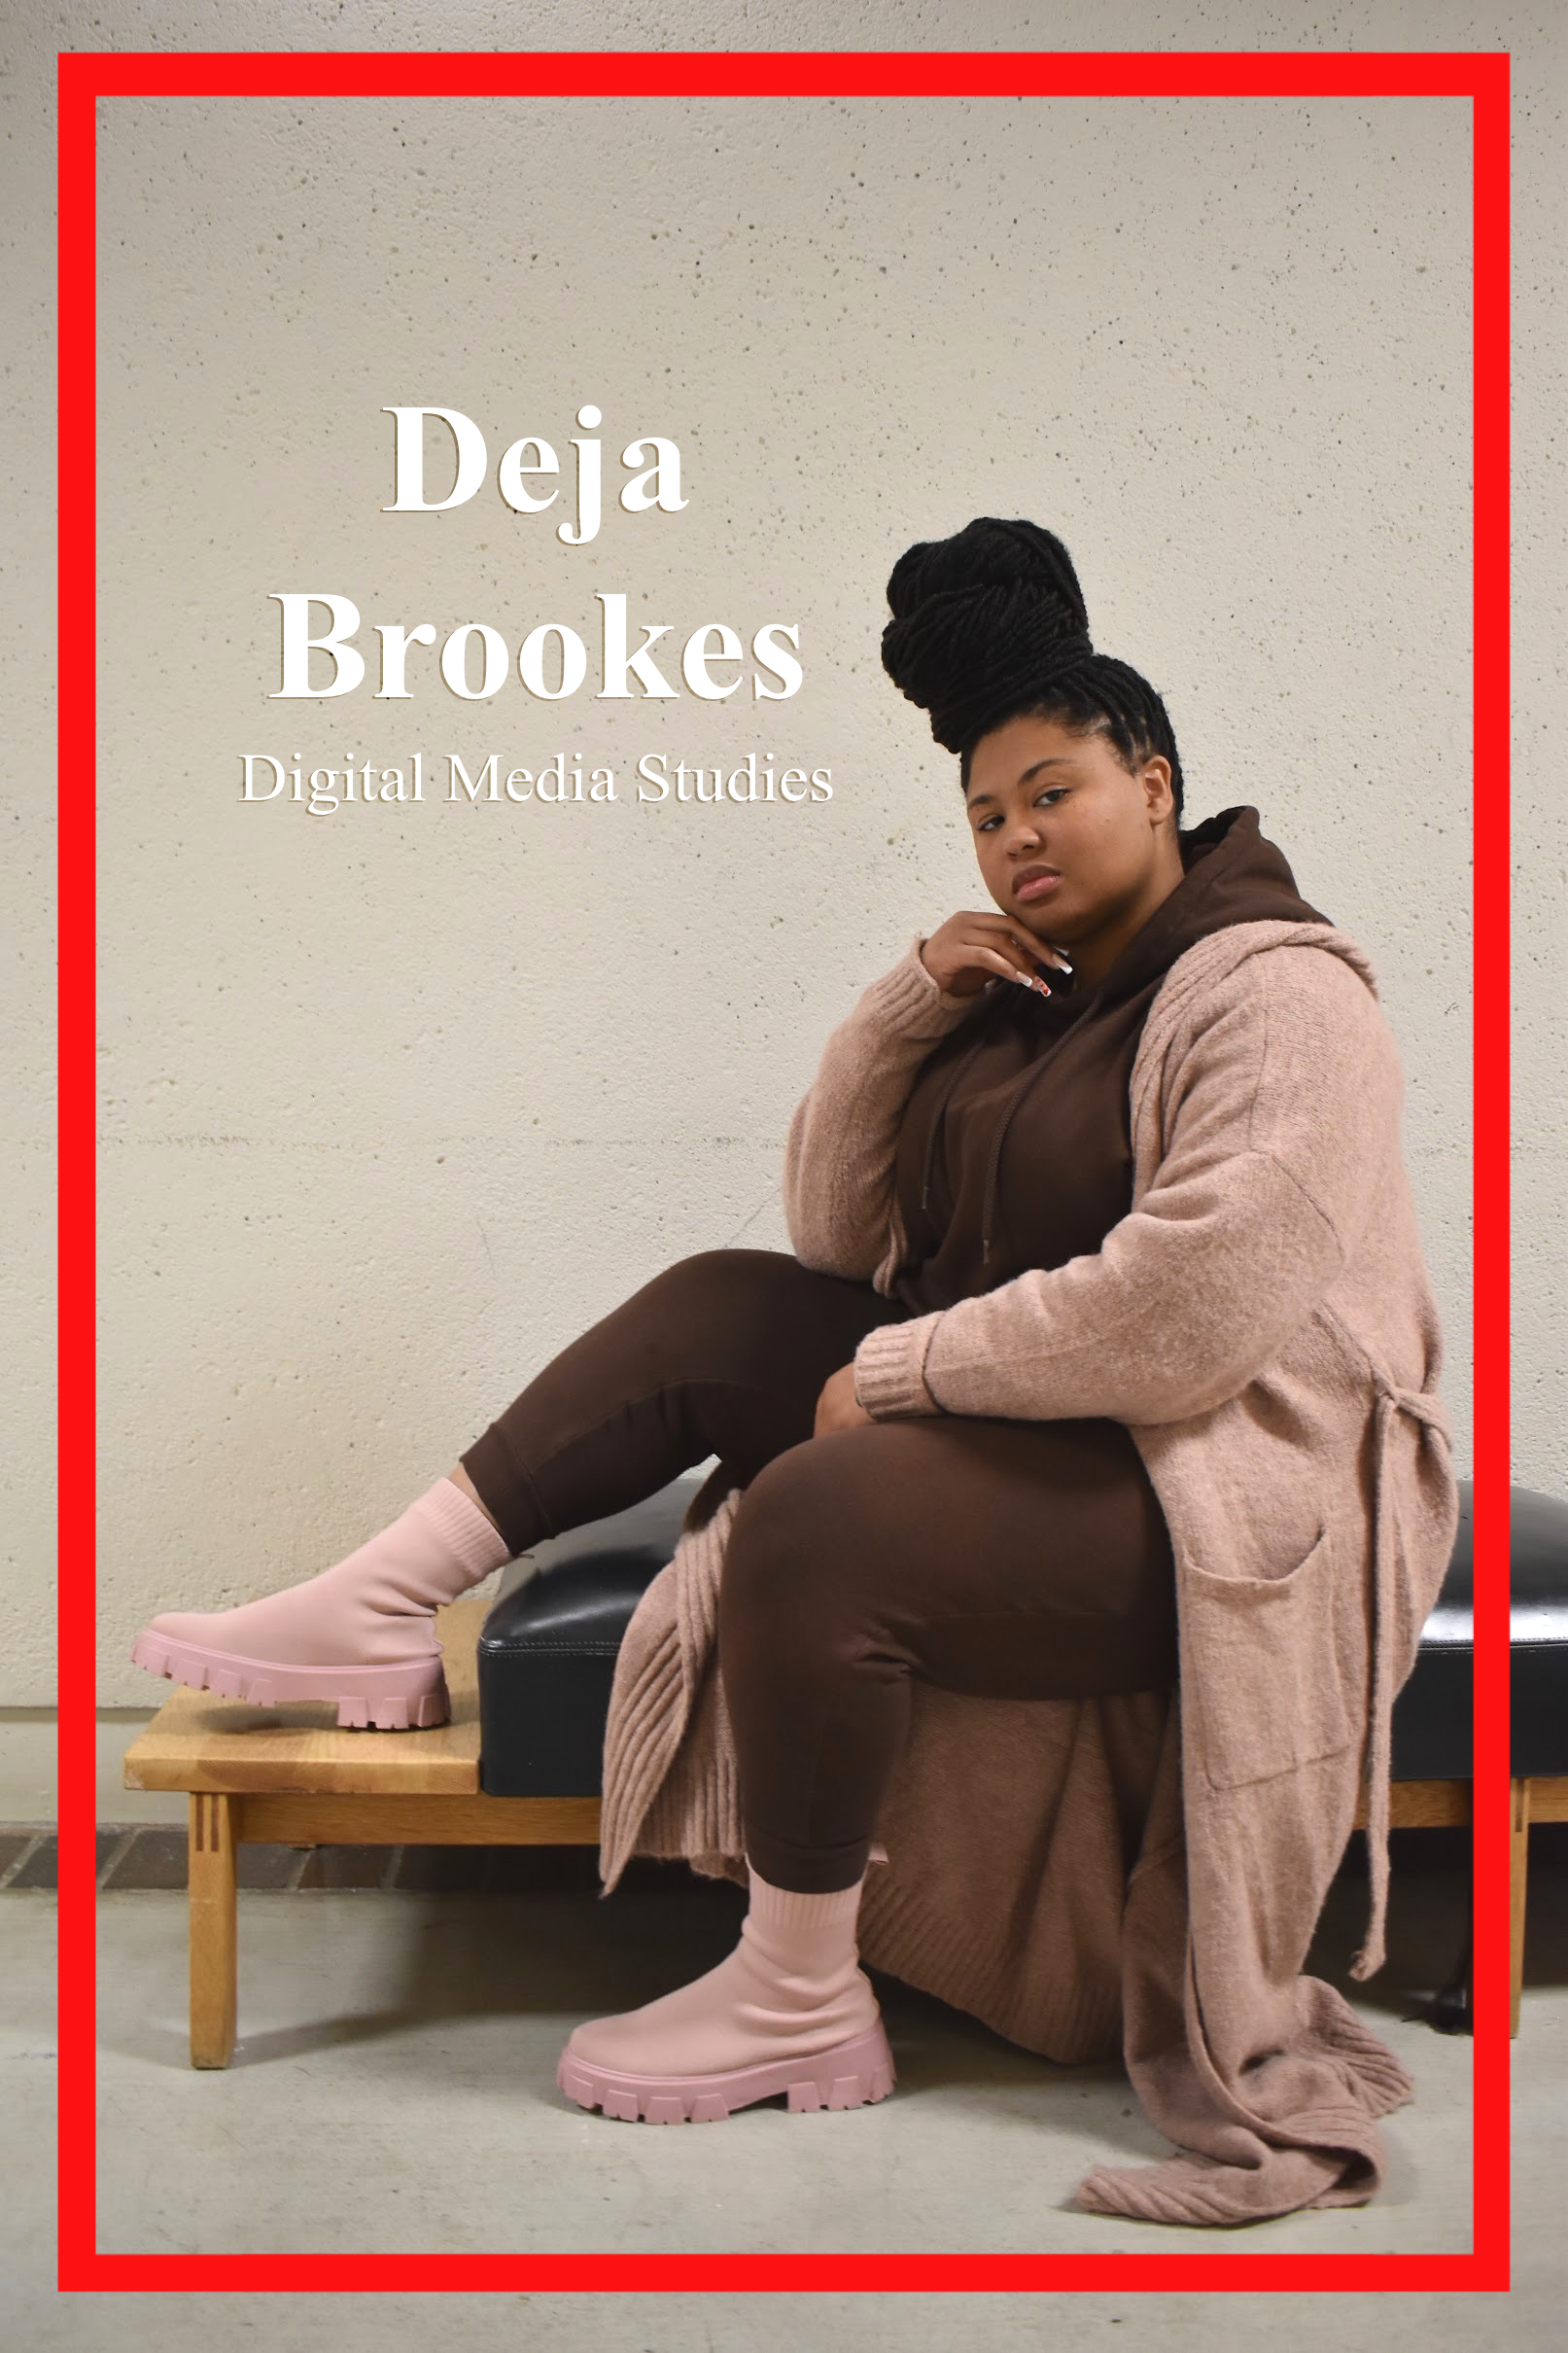 Deja Brookes, Digital Media Studies Major, poses on a bench in Arbor Central. Dressed in a matching brown track suit with a cotton dusty rose cardigan and boots.